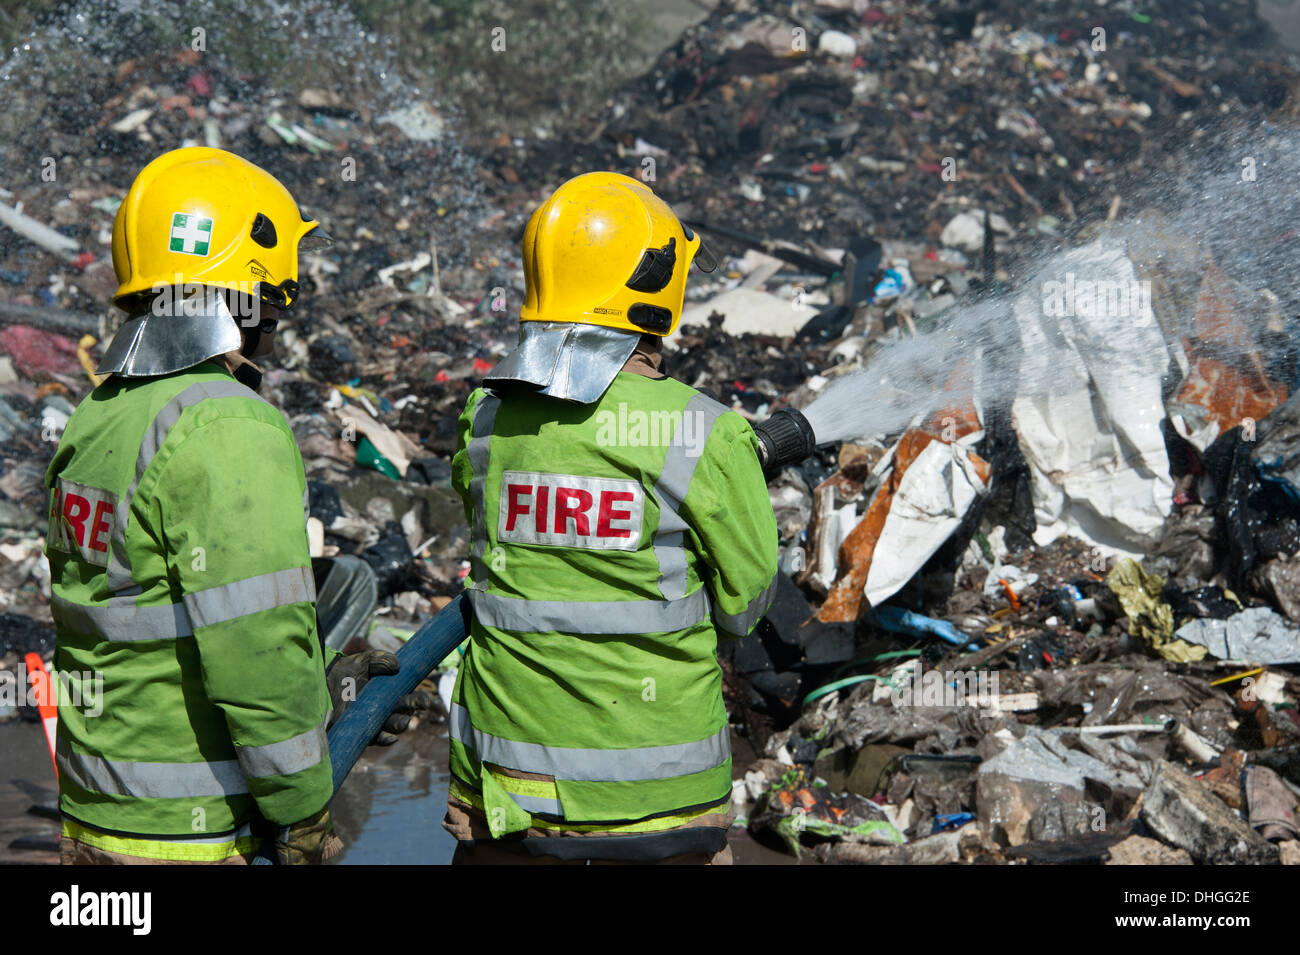 Firefighters Firemen fighting rubbish fire Stock Photo